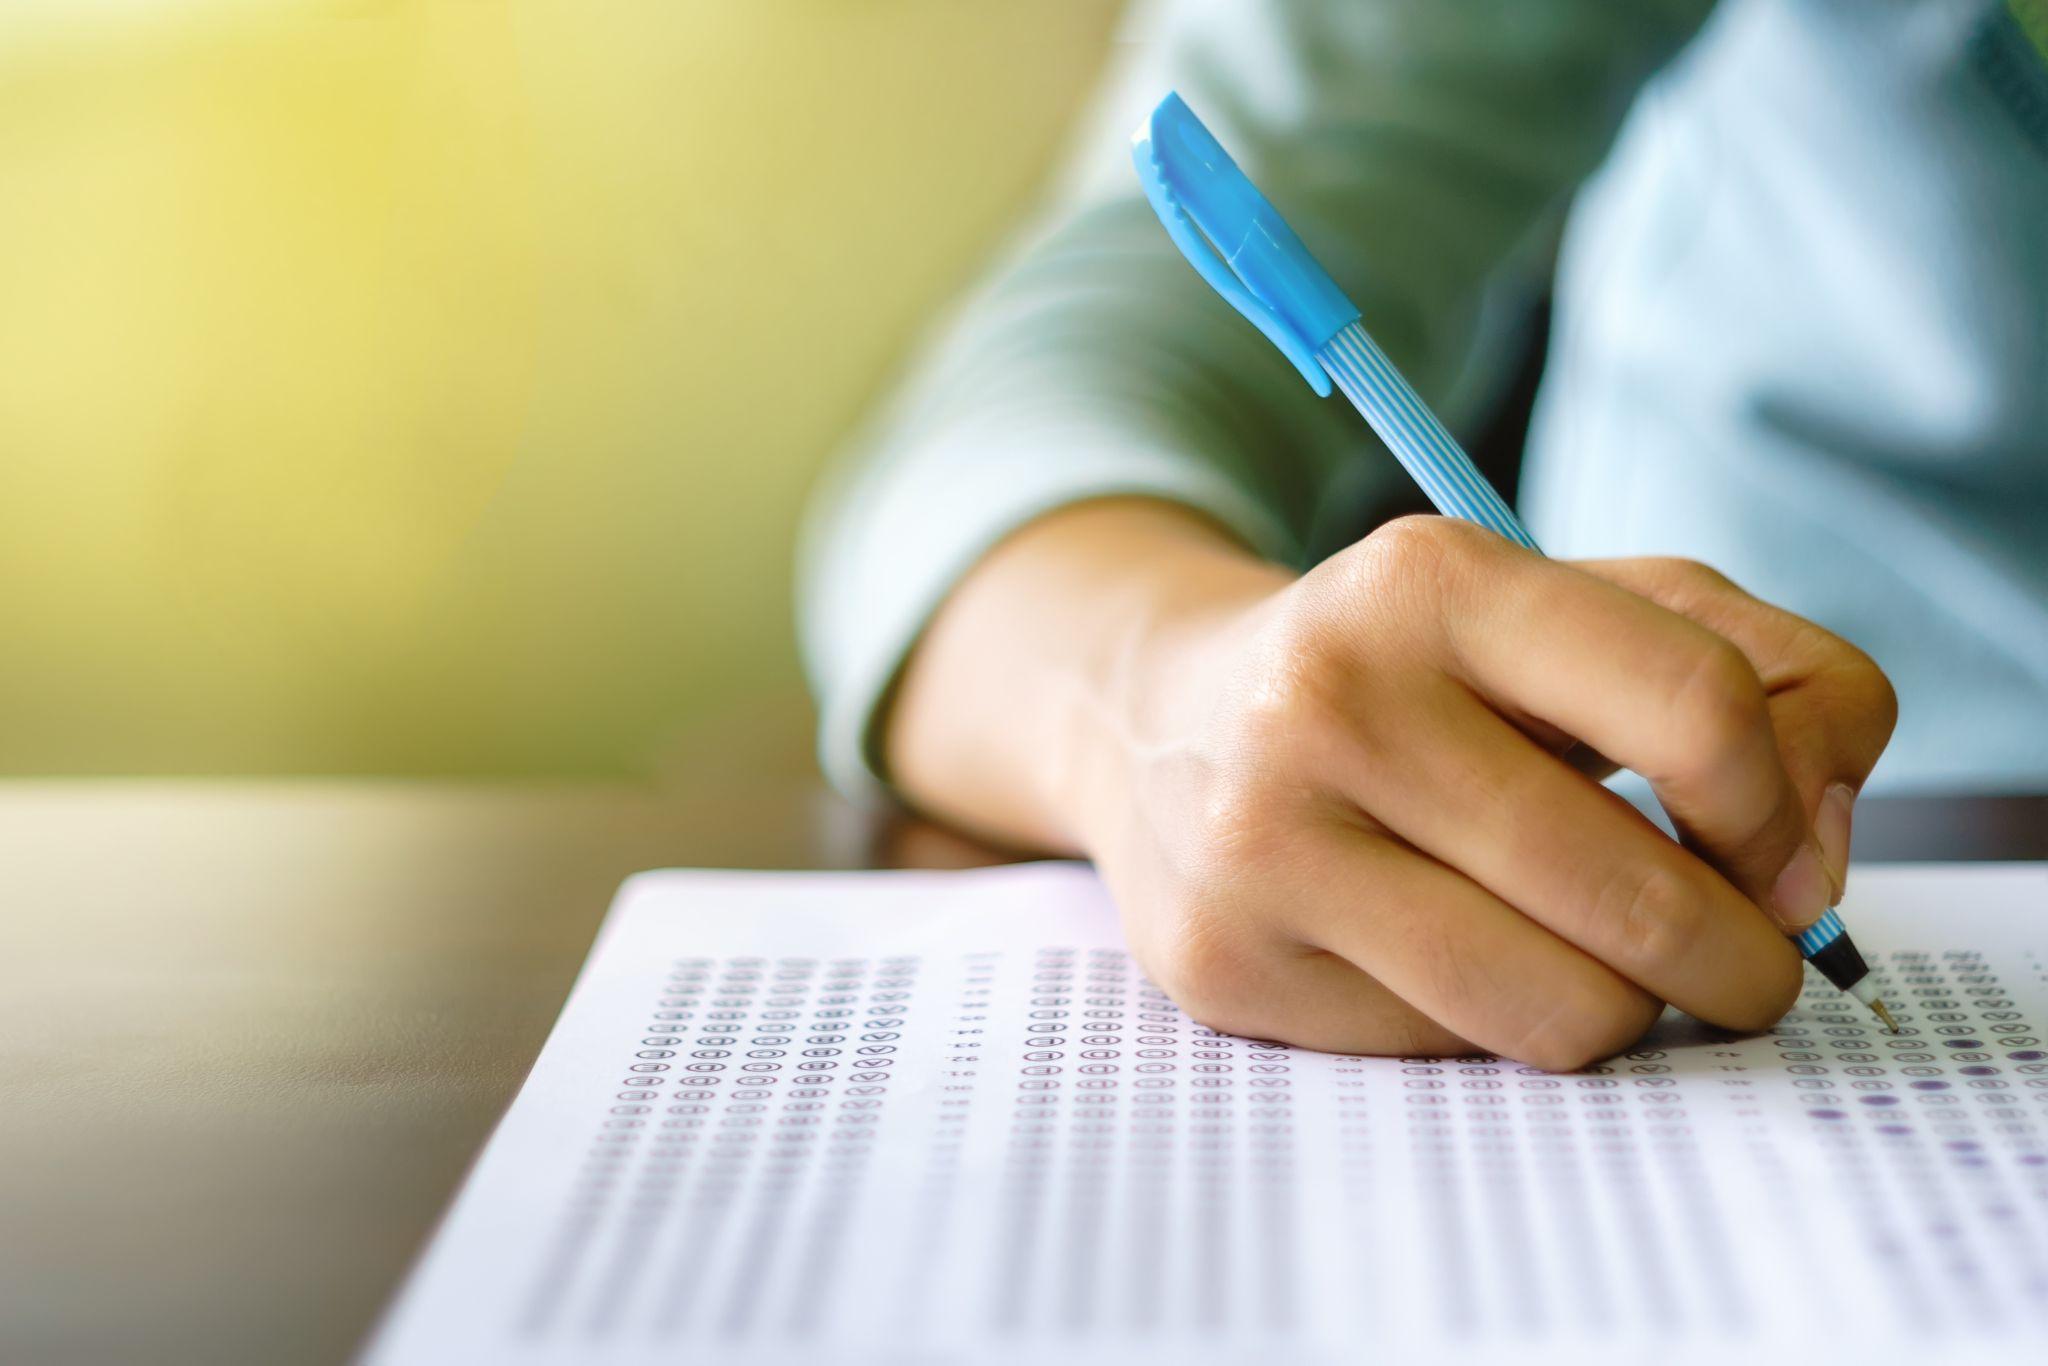 Close up of high school or university student holding a pen writing on answer sheet paper in examination room.